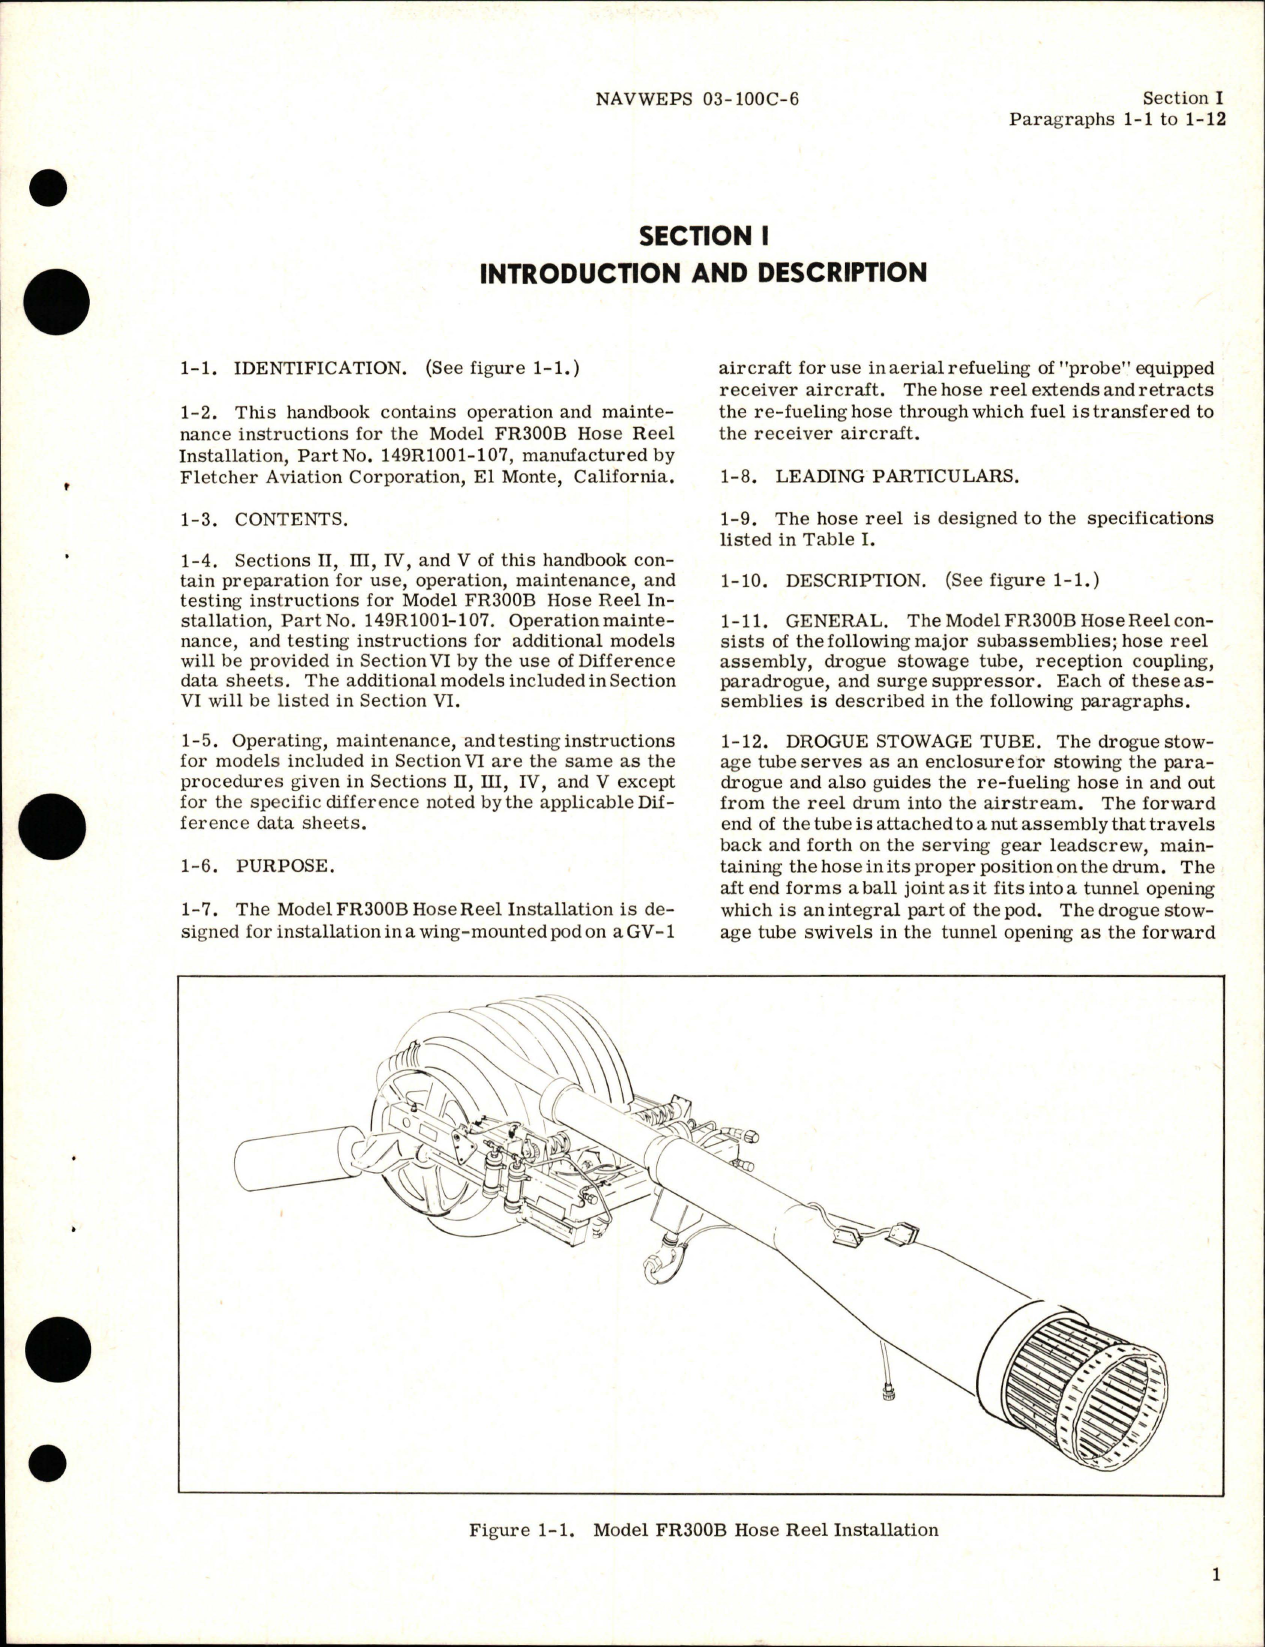 Sample page 5 from AirCorps Library document: Operation and Maintenance Instructions for Hose Reel Installation - Model FR300B - Part 149R1001-107 